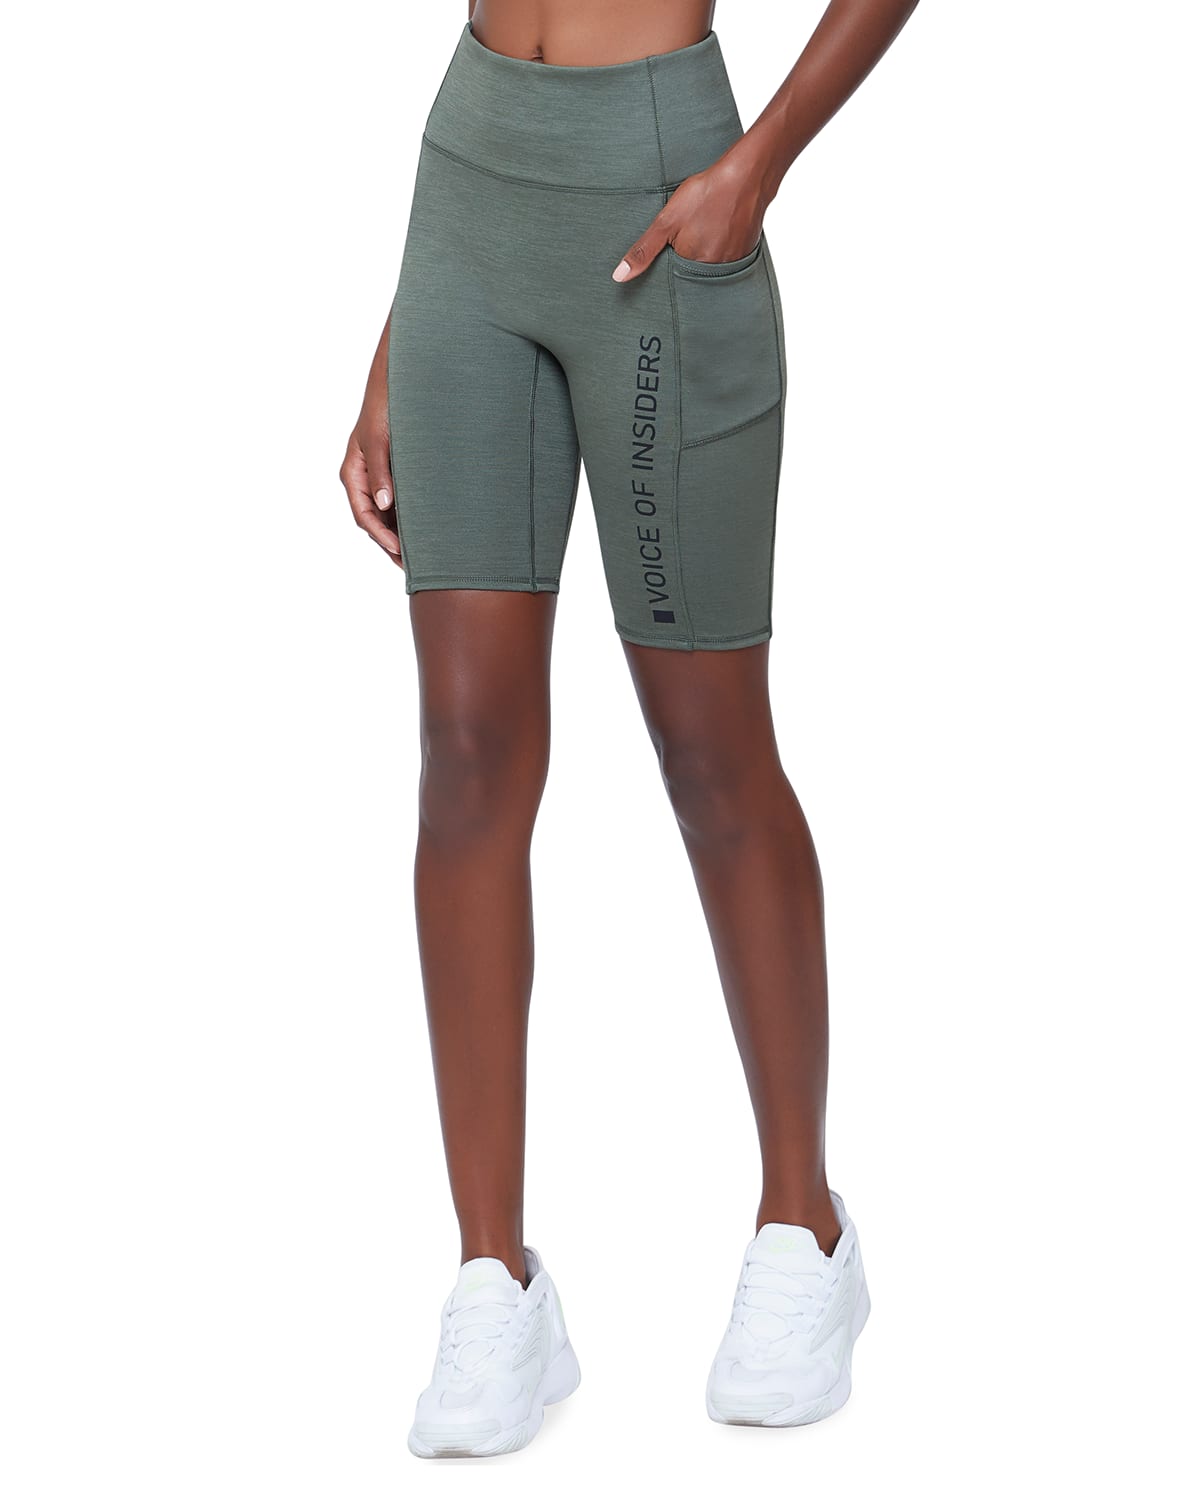 Voice Of Insiders Seacell Cycling Shorts In Green Heather